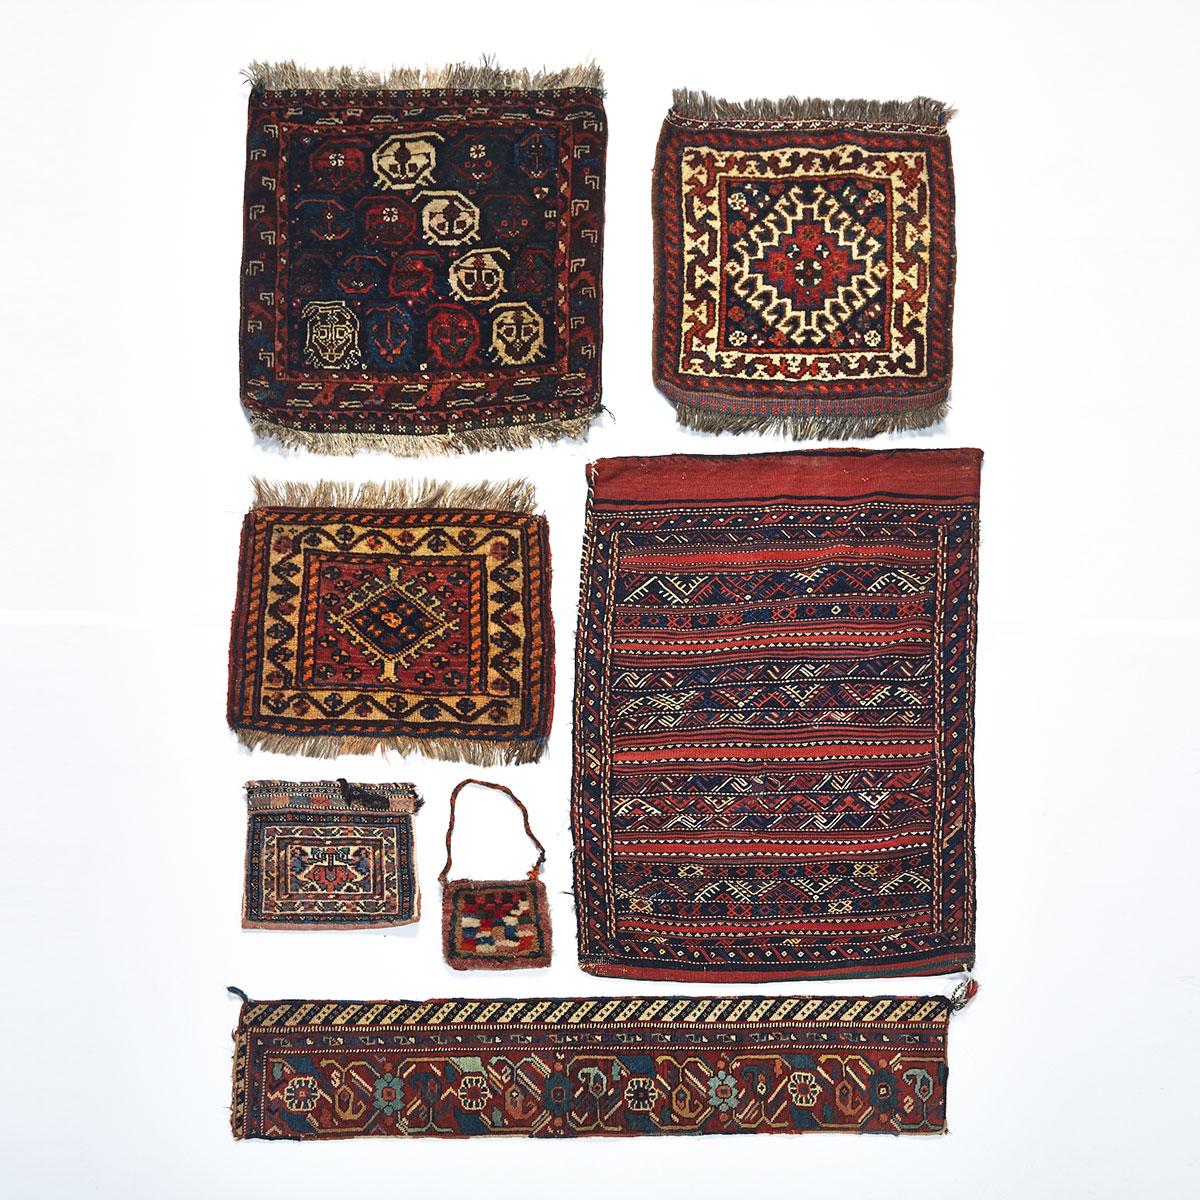 Group of Seven Various Pile Woven Tribal Textiles